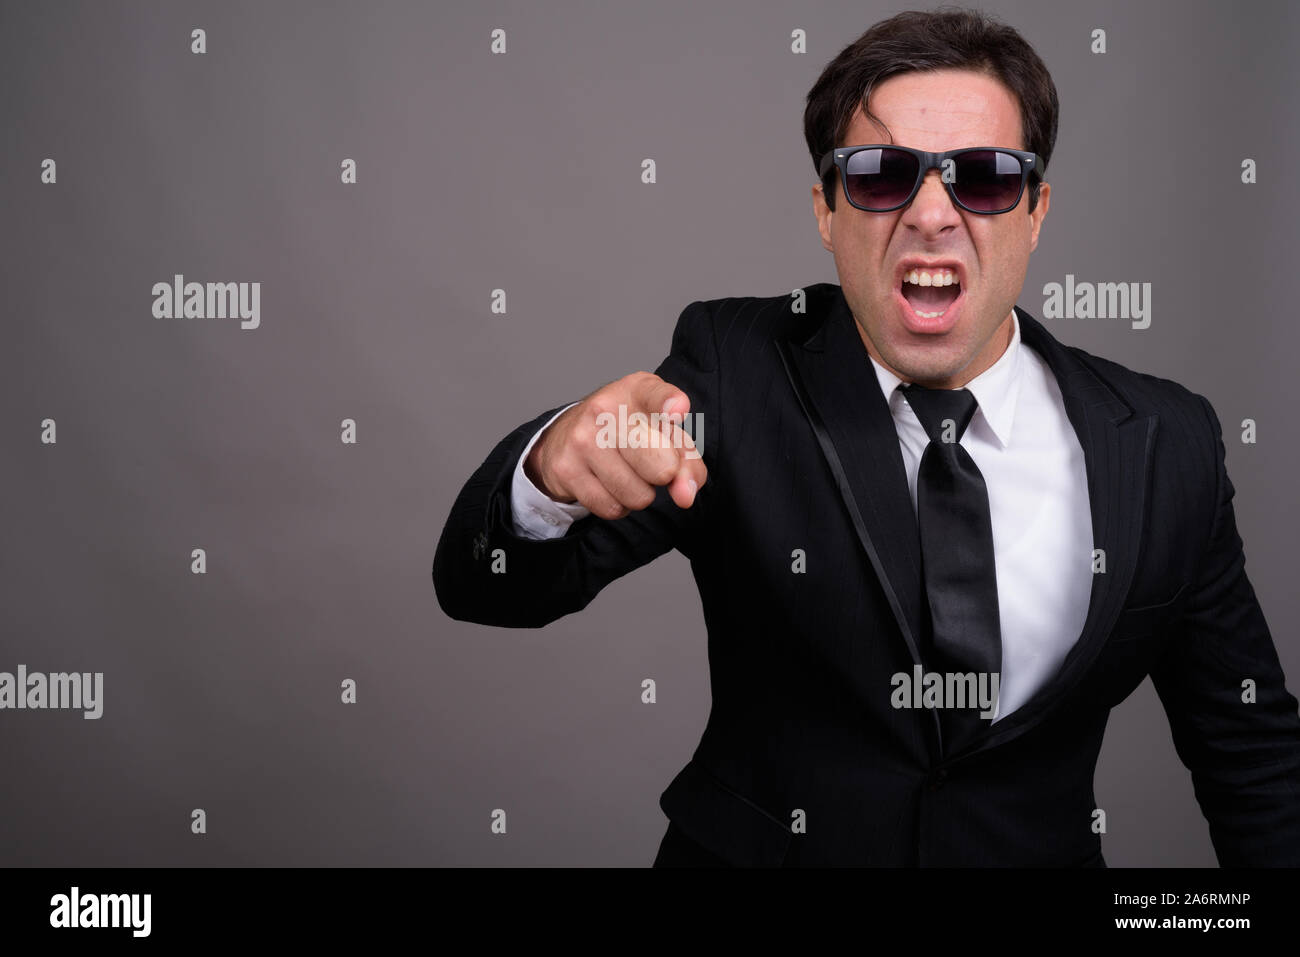 Angry Persian businessman with sunglasses pointing at camera Stock Photo